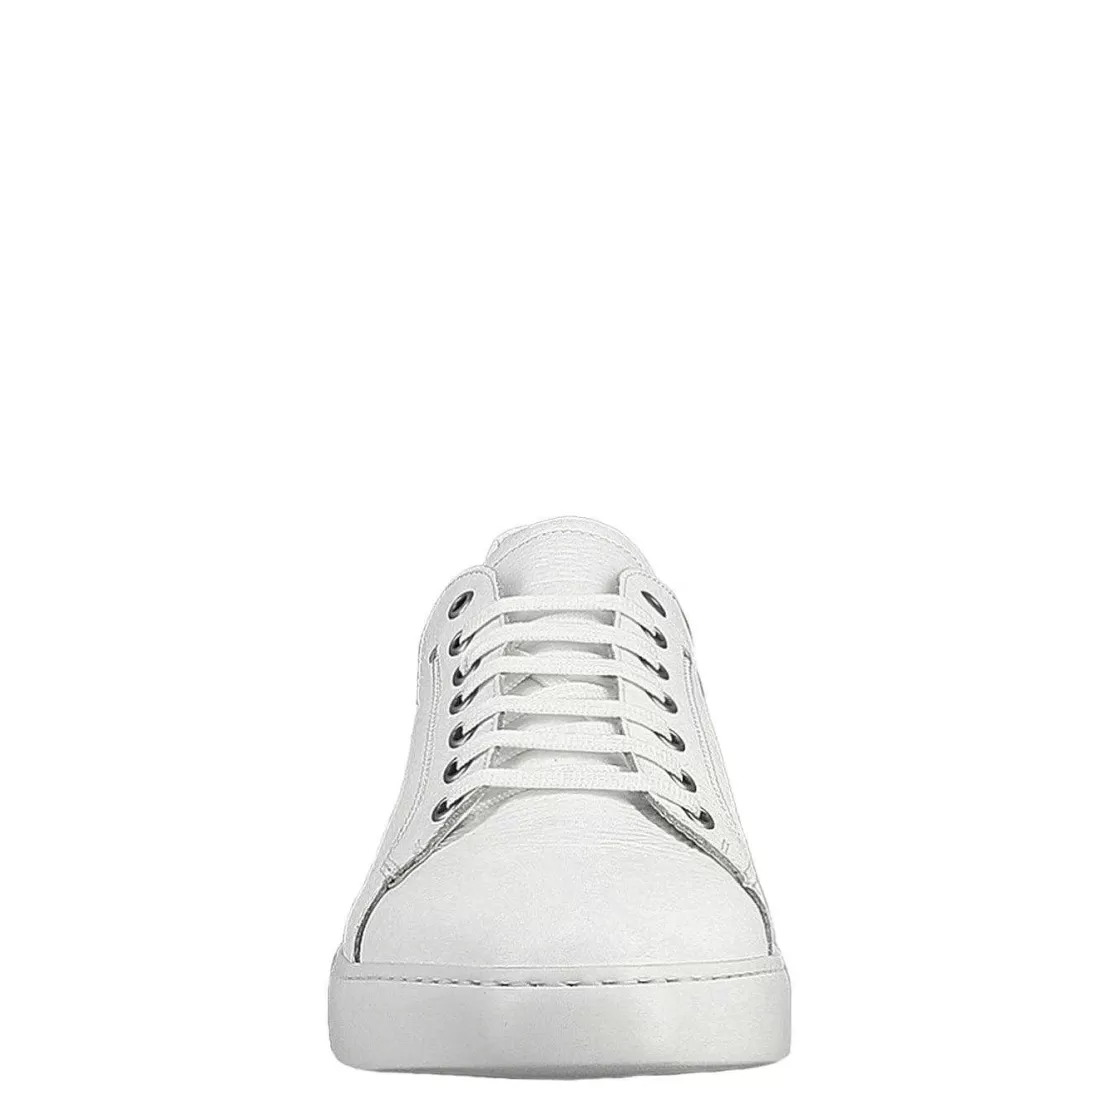 Leonardo Men'S Handmade Lace-Up Casual Shoes In White Leather Clearance